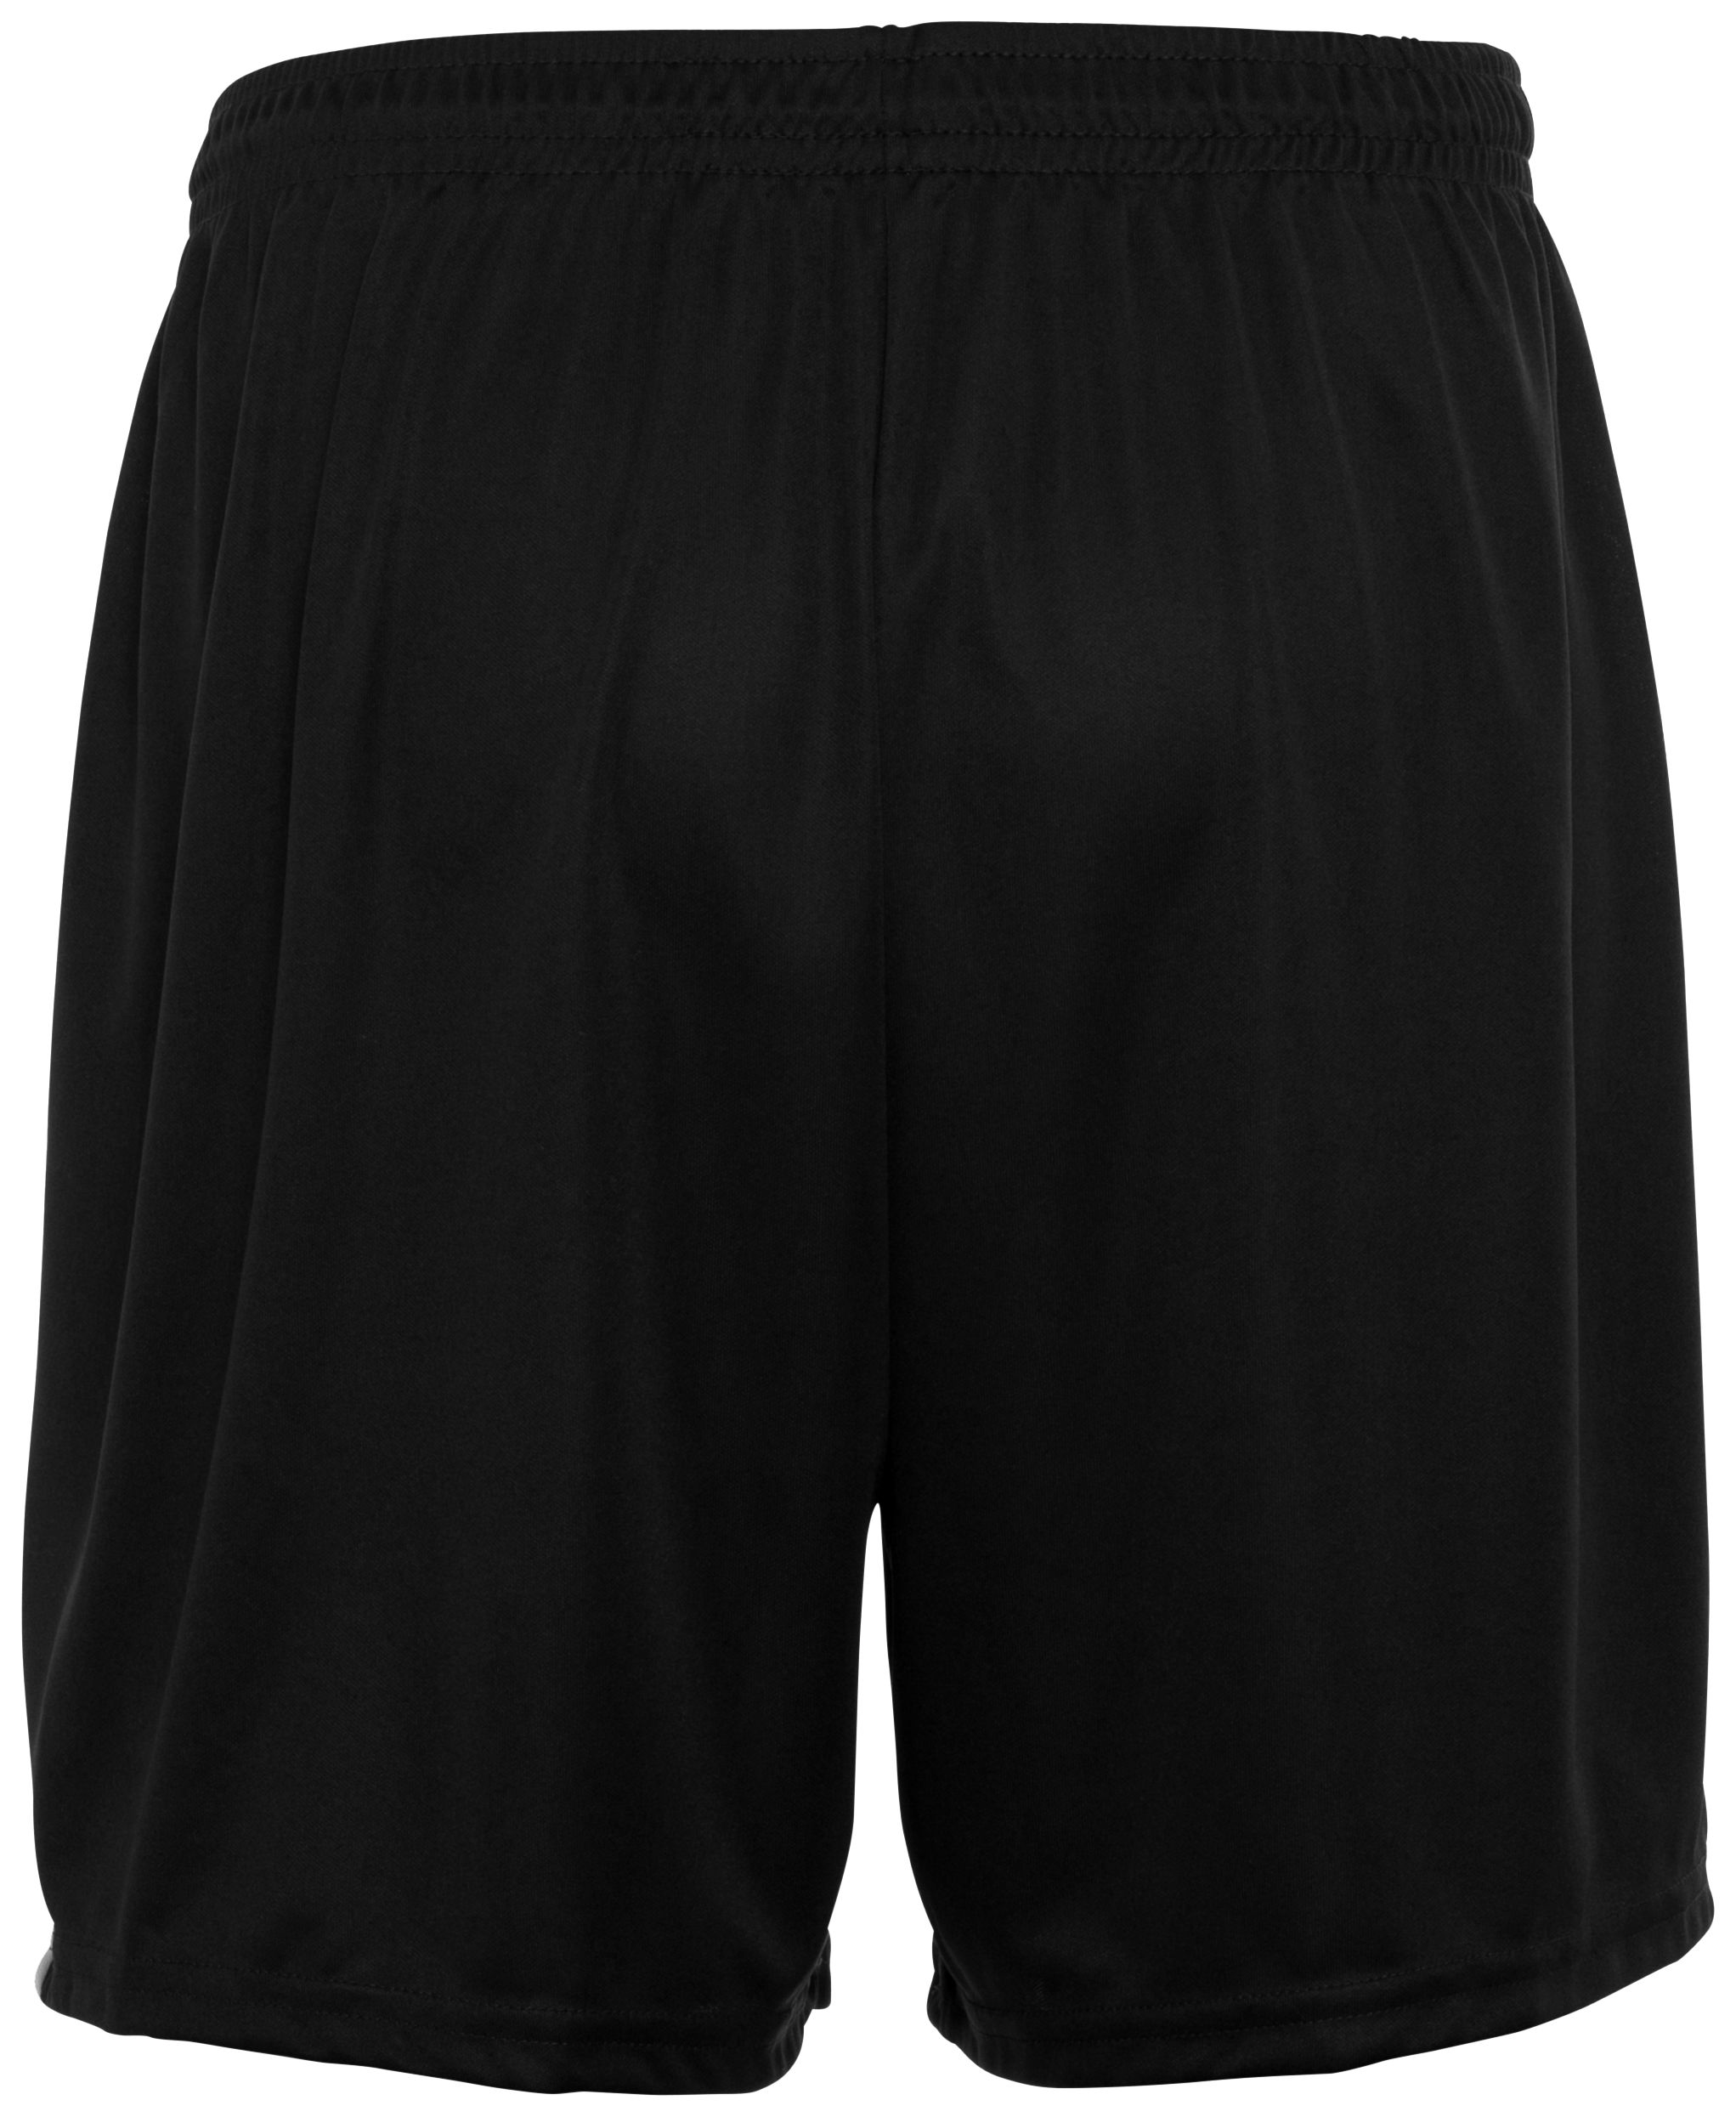 461  YOUTH WICKING SOCCER SHORTS WITH PIPING